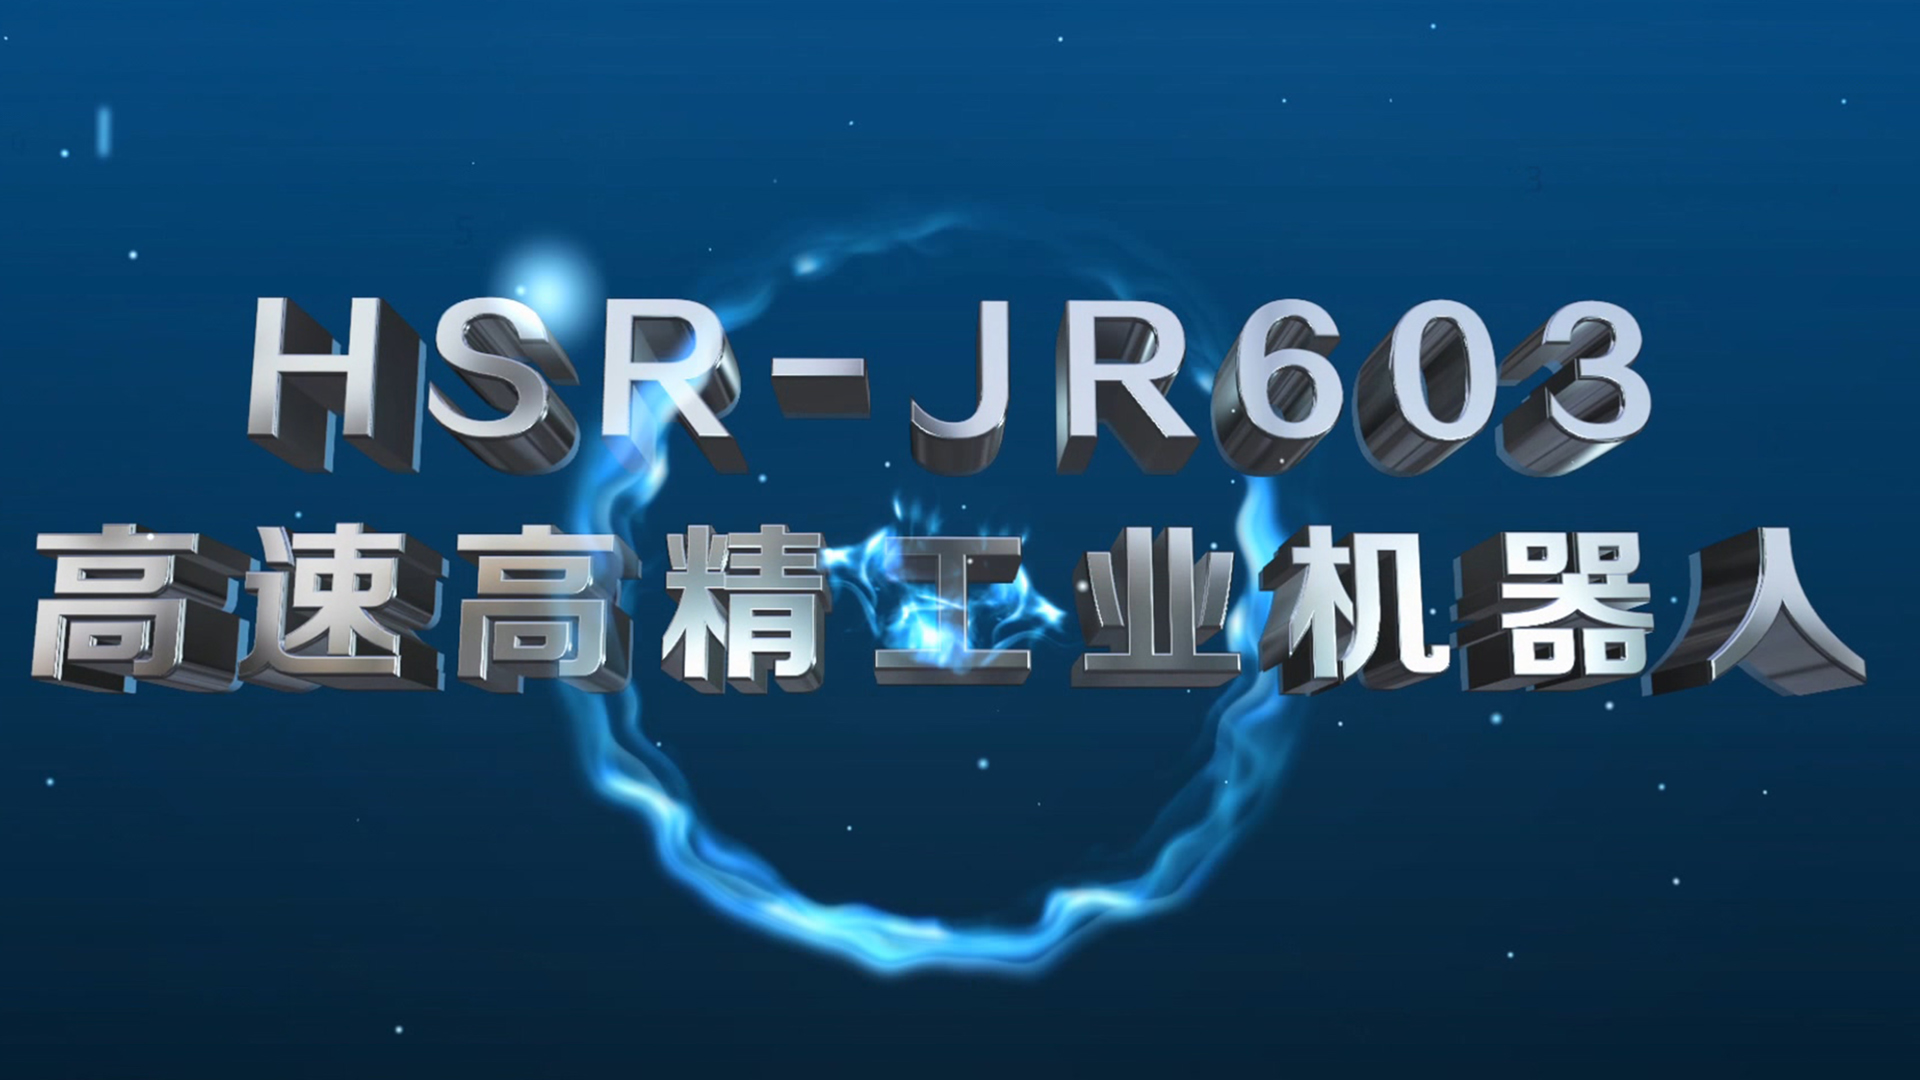 Video of JR603 high speed high precision industrial robot 